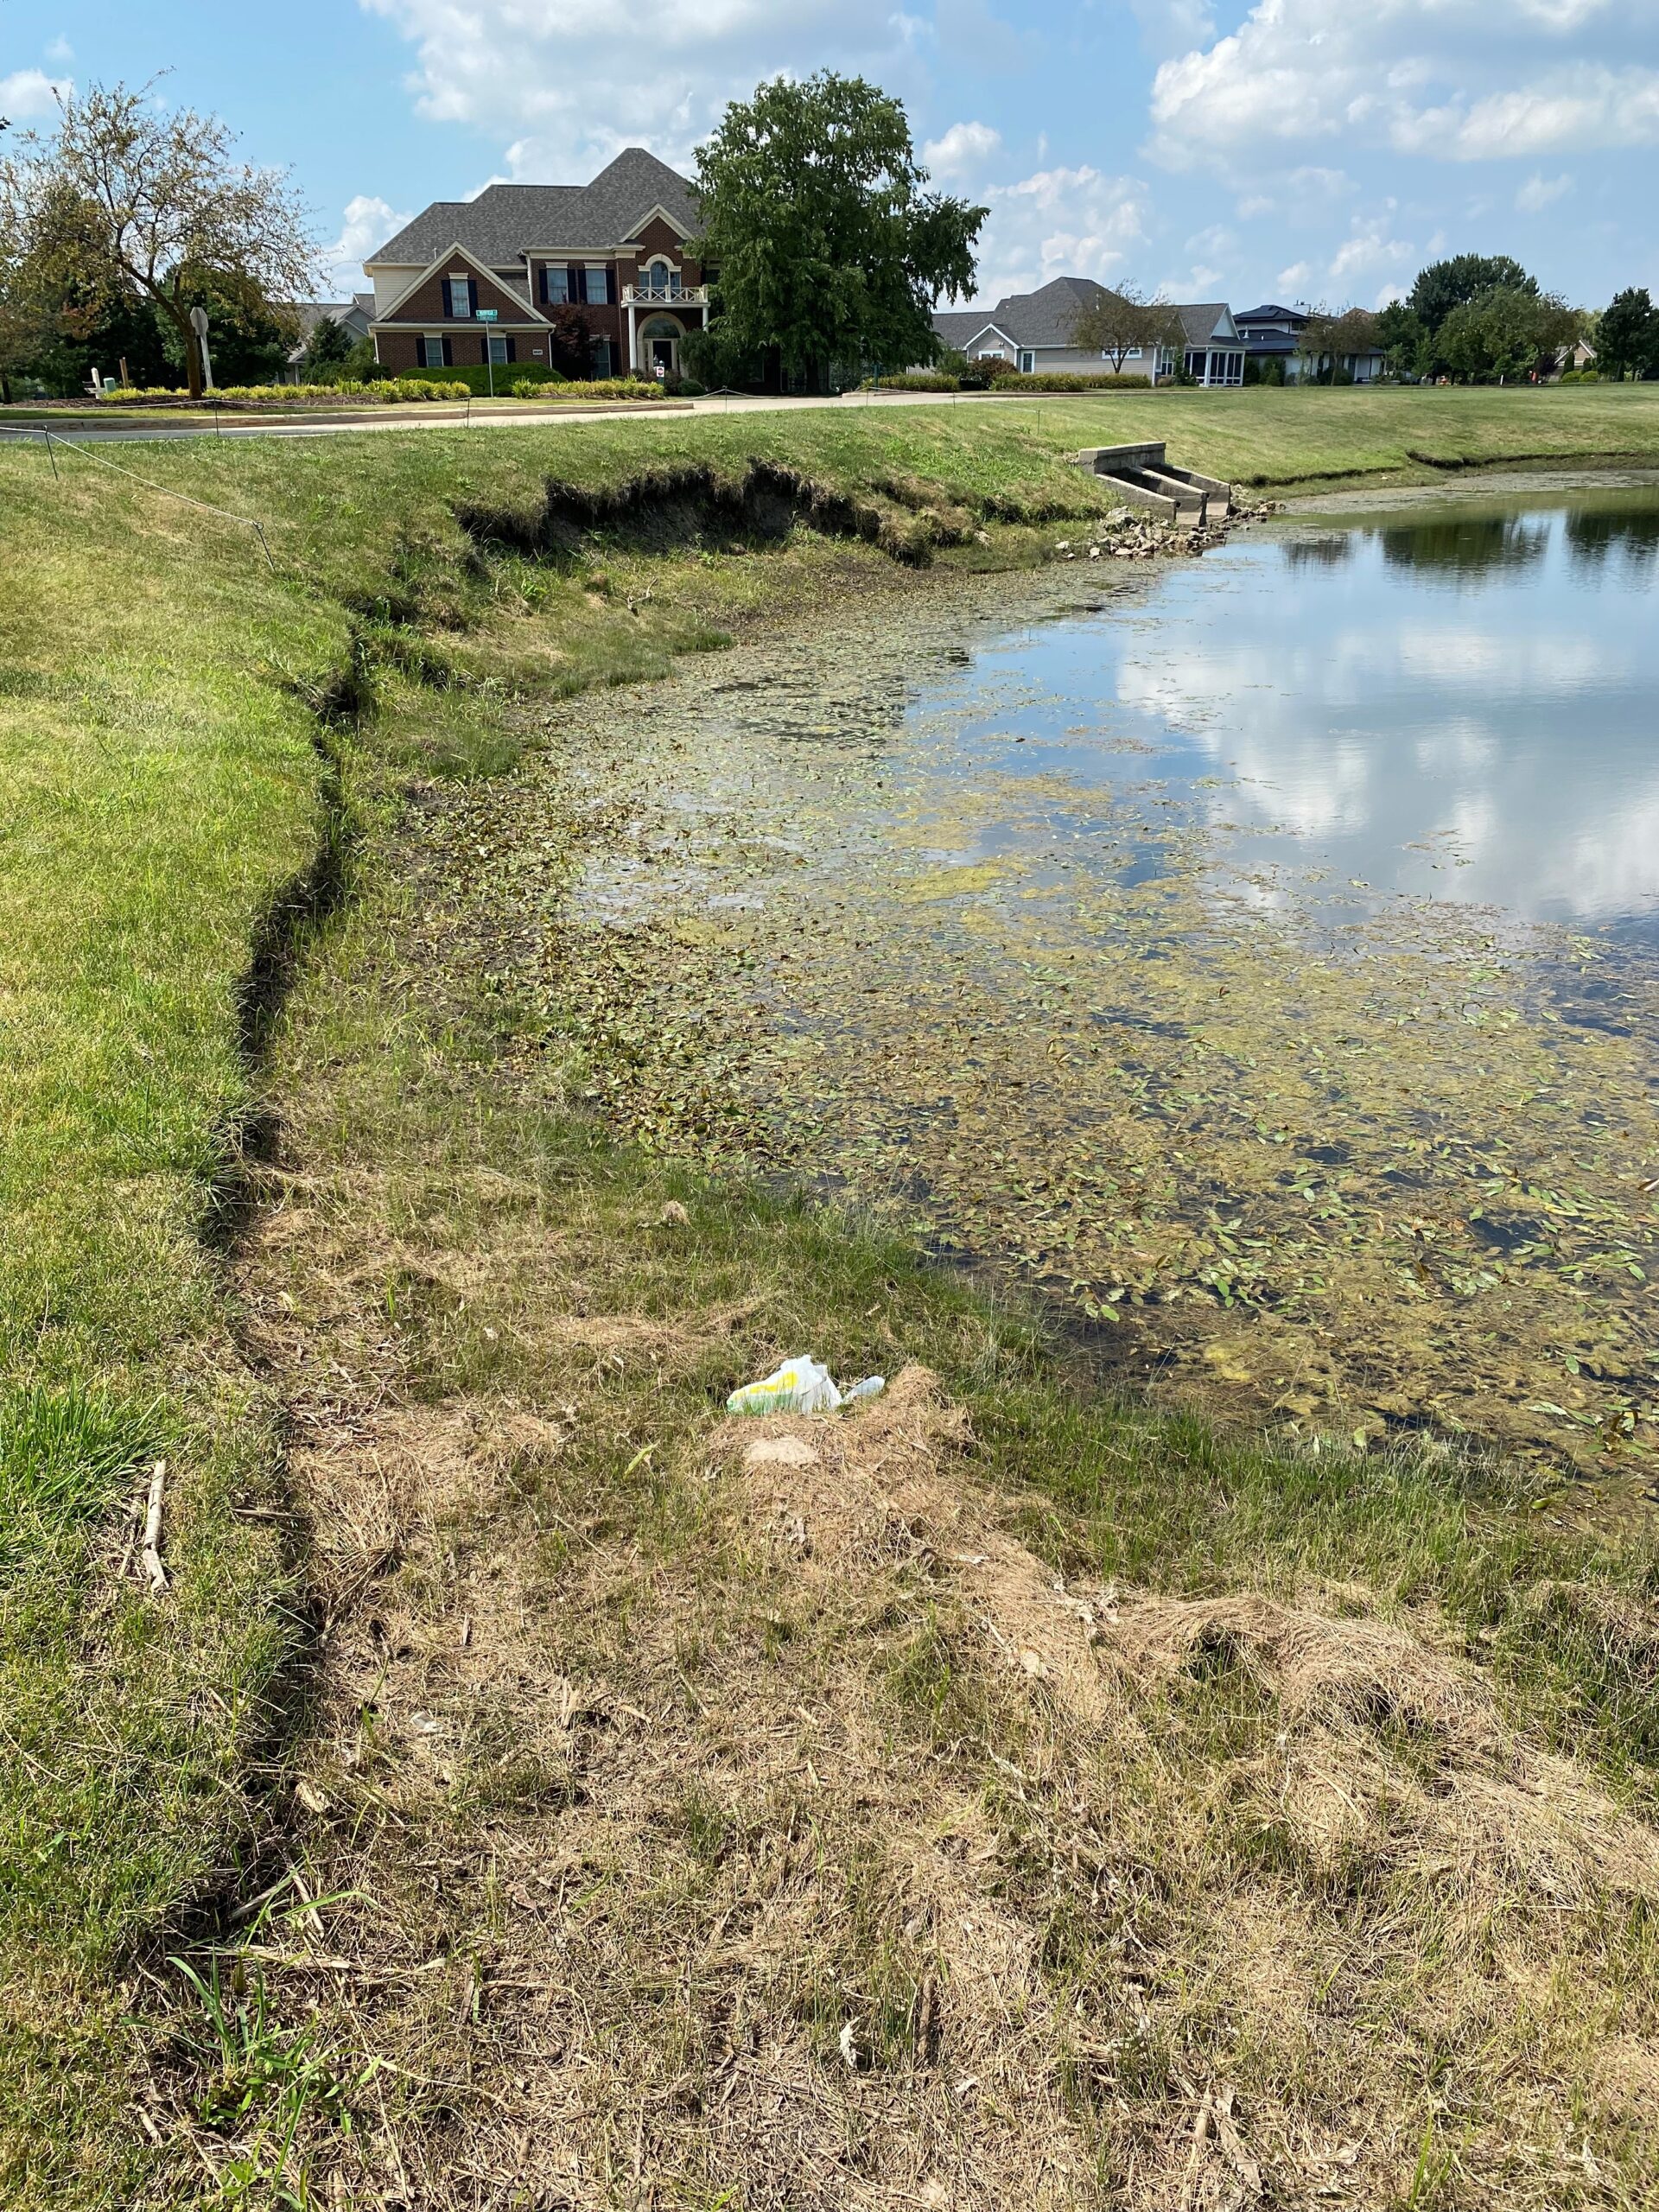 Golf course pond with erosion before ShearForce10 was installed